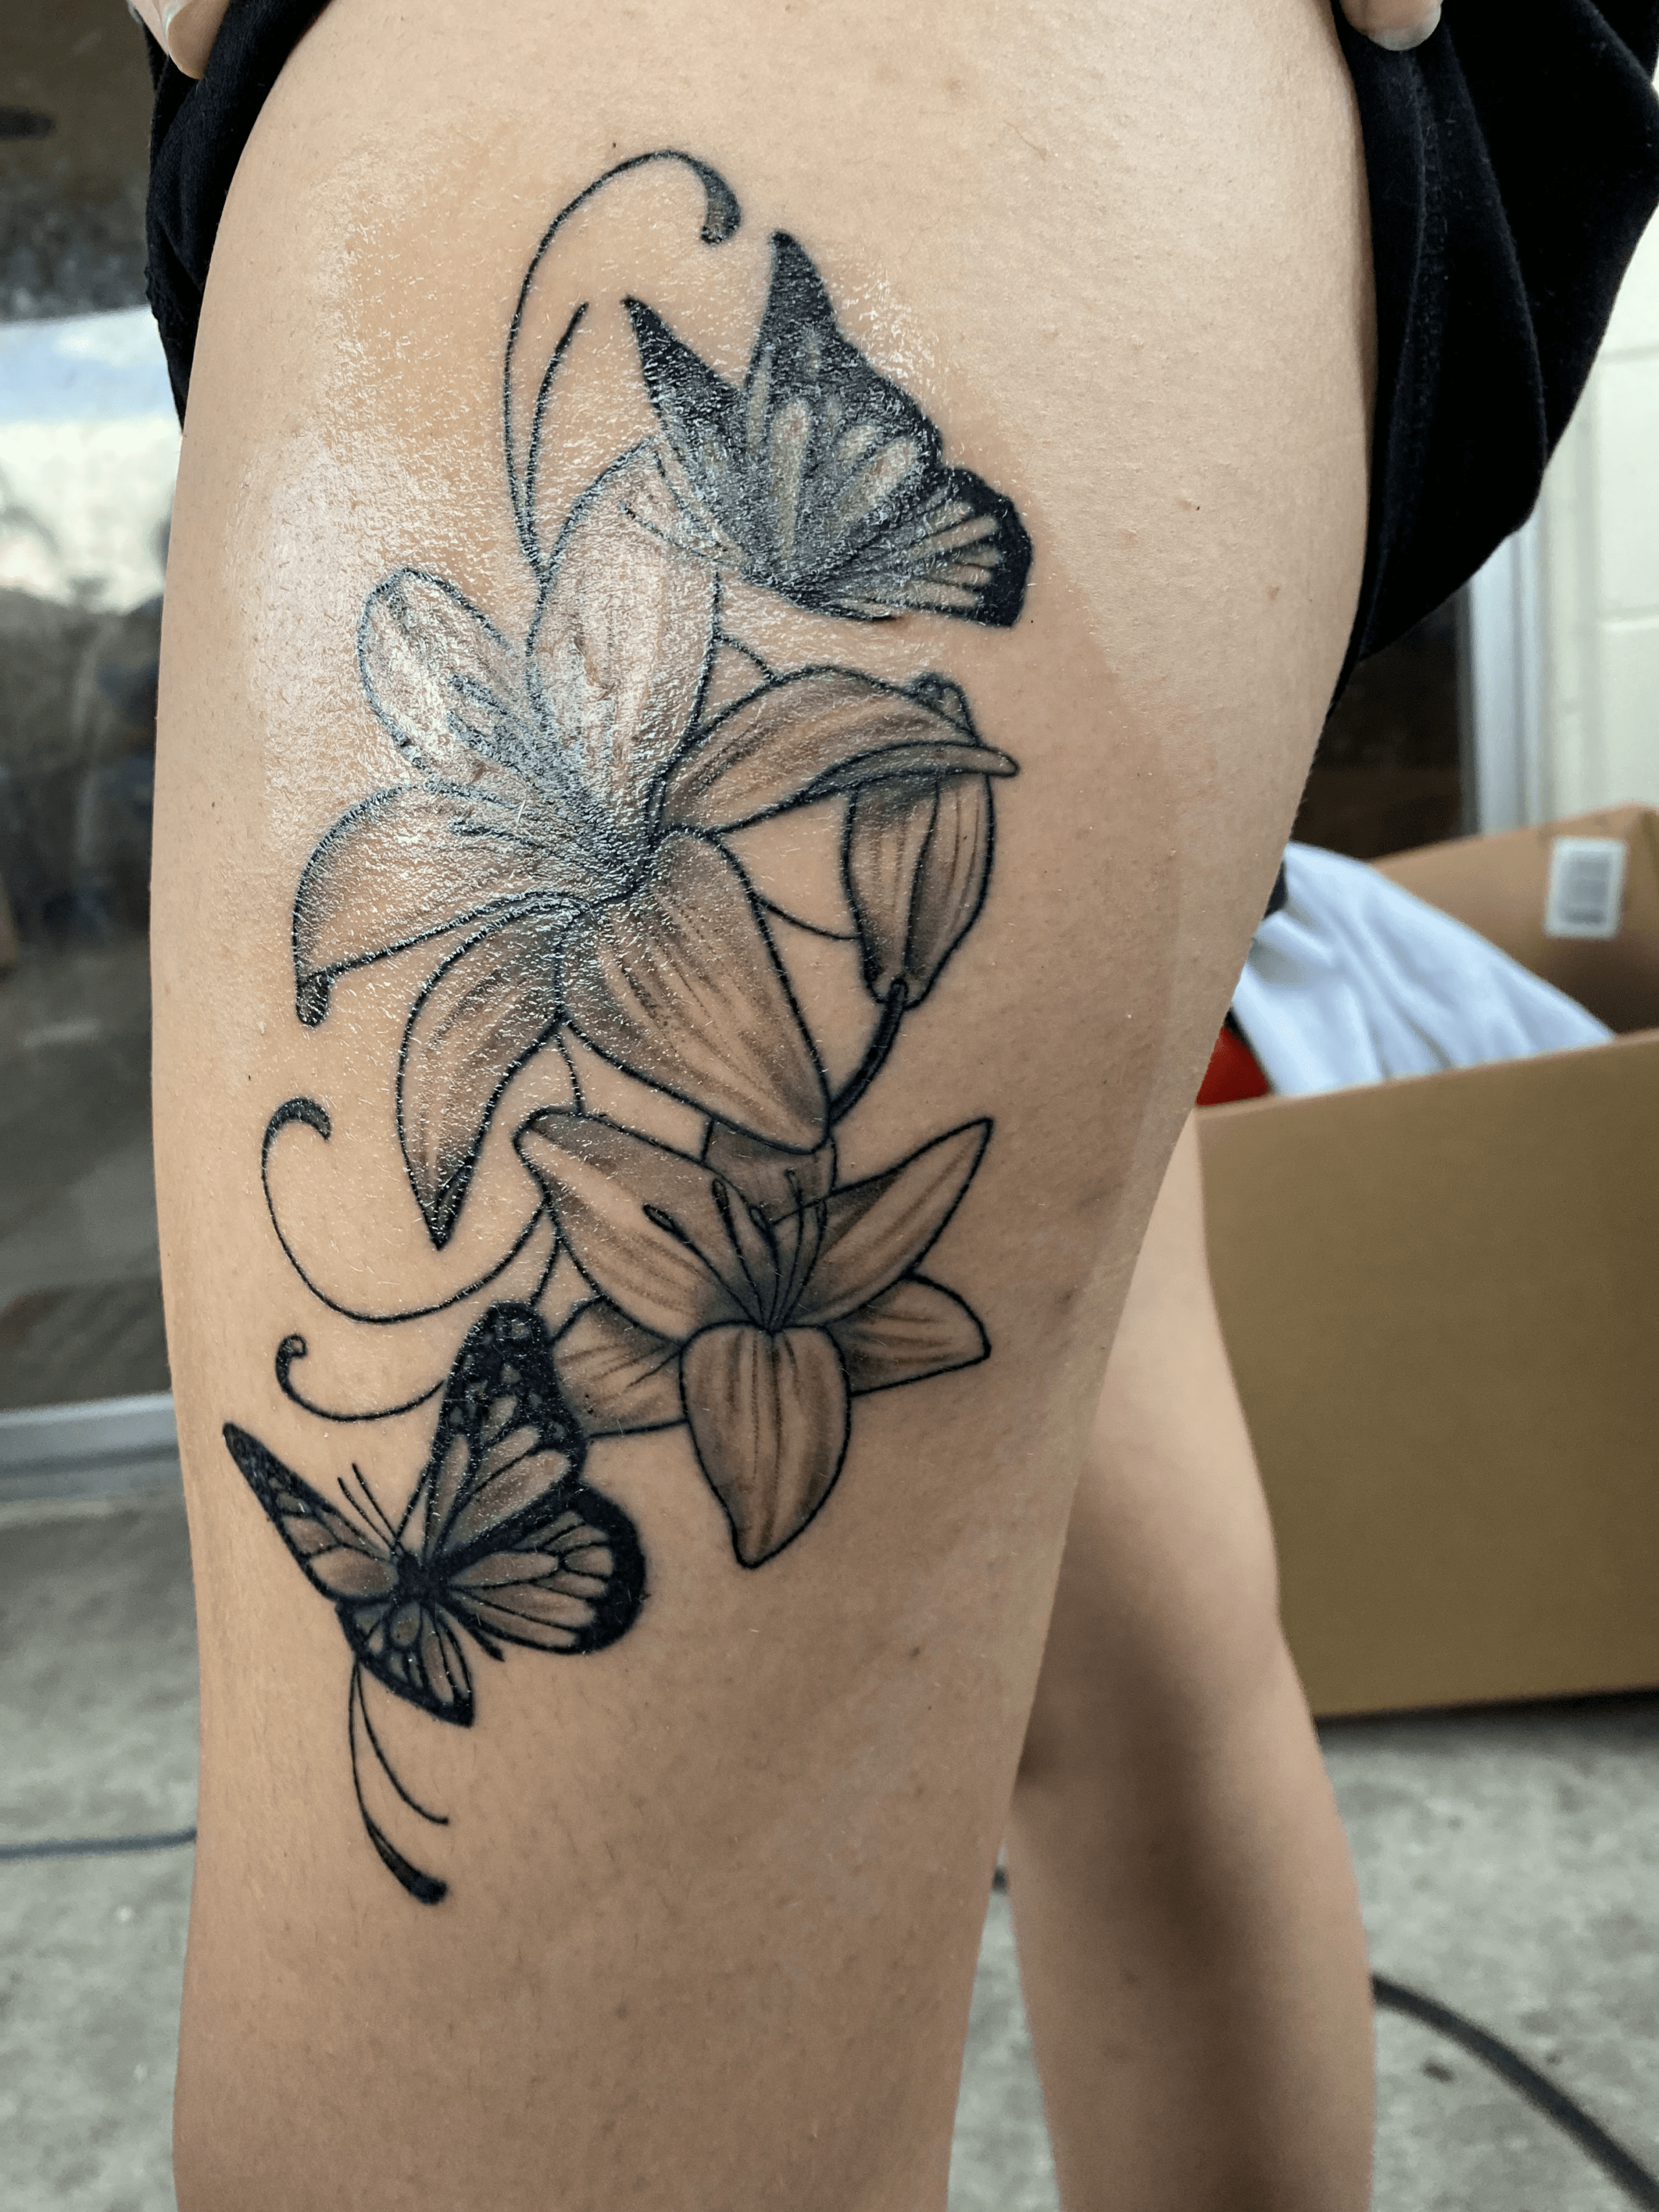 Symbolism Of Lily And Butterfly Tattoos